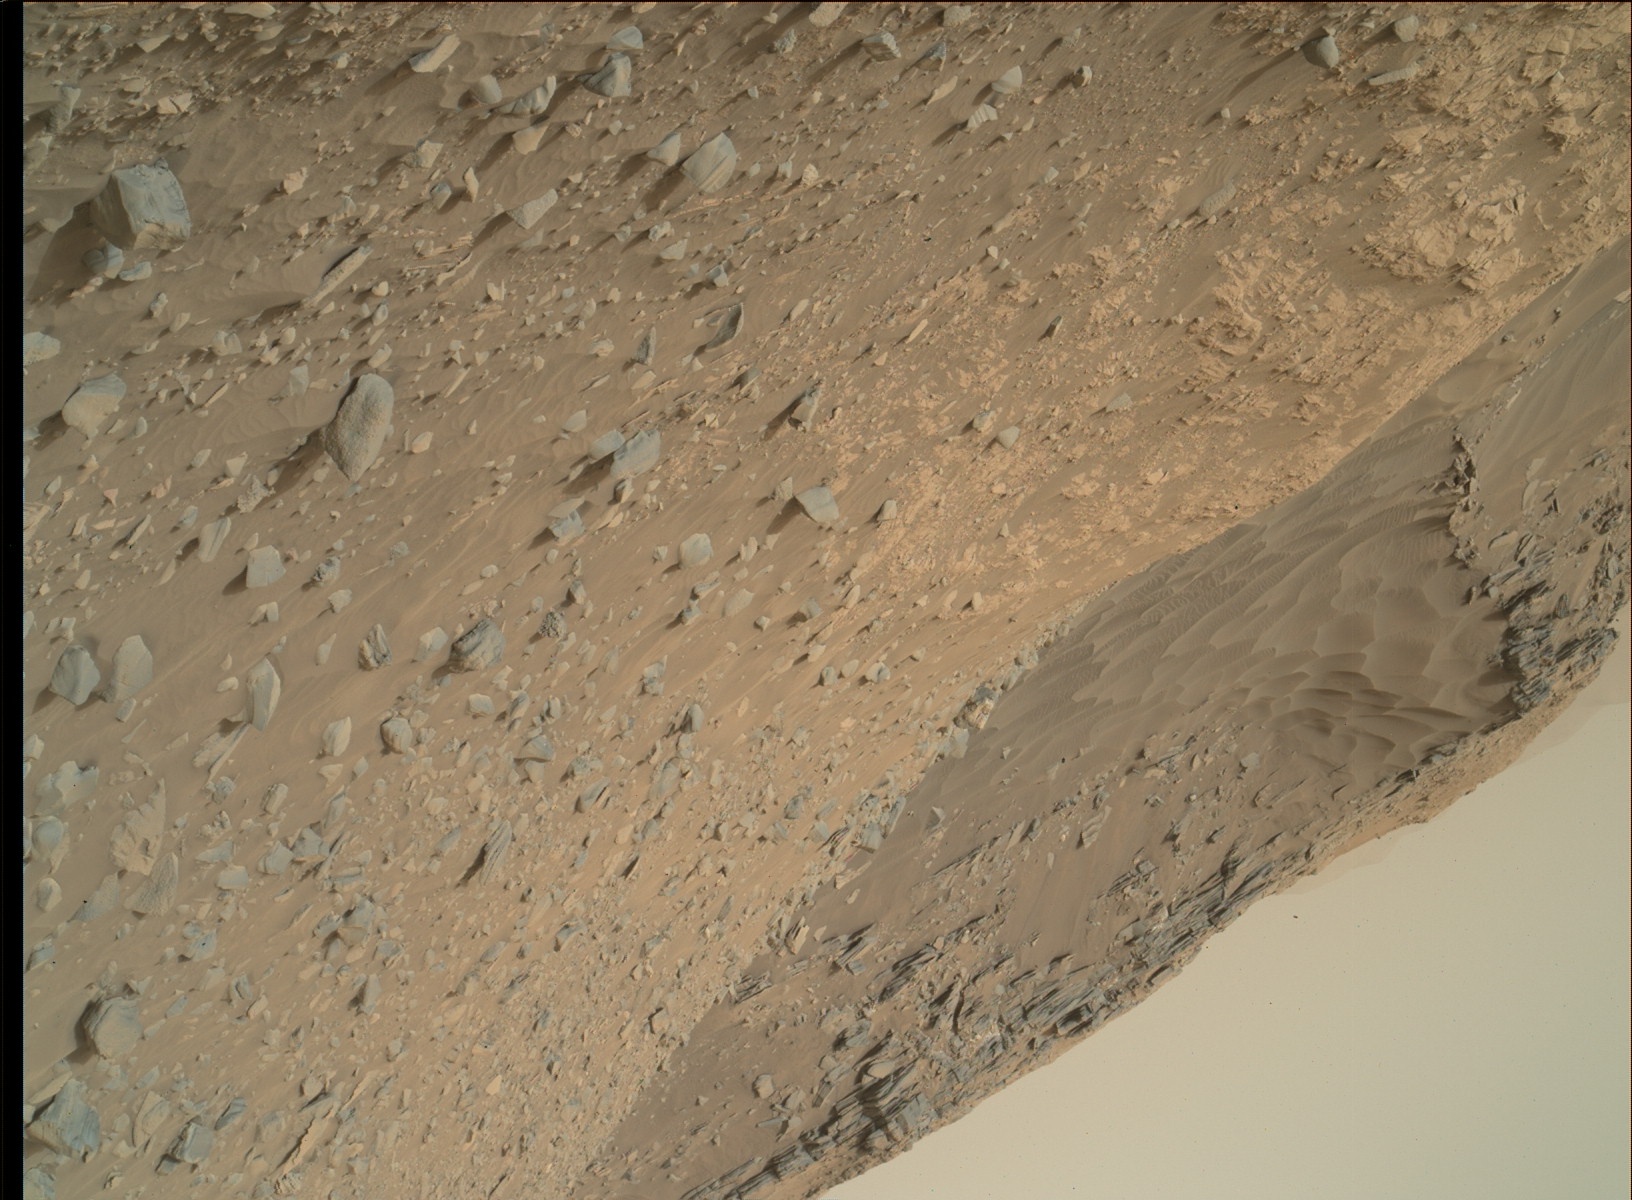 Nasa's Mars rover Curiosity acquired this image using its Mars Hand Lens Imager (MAHLI) on Sol 1373